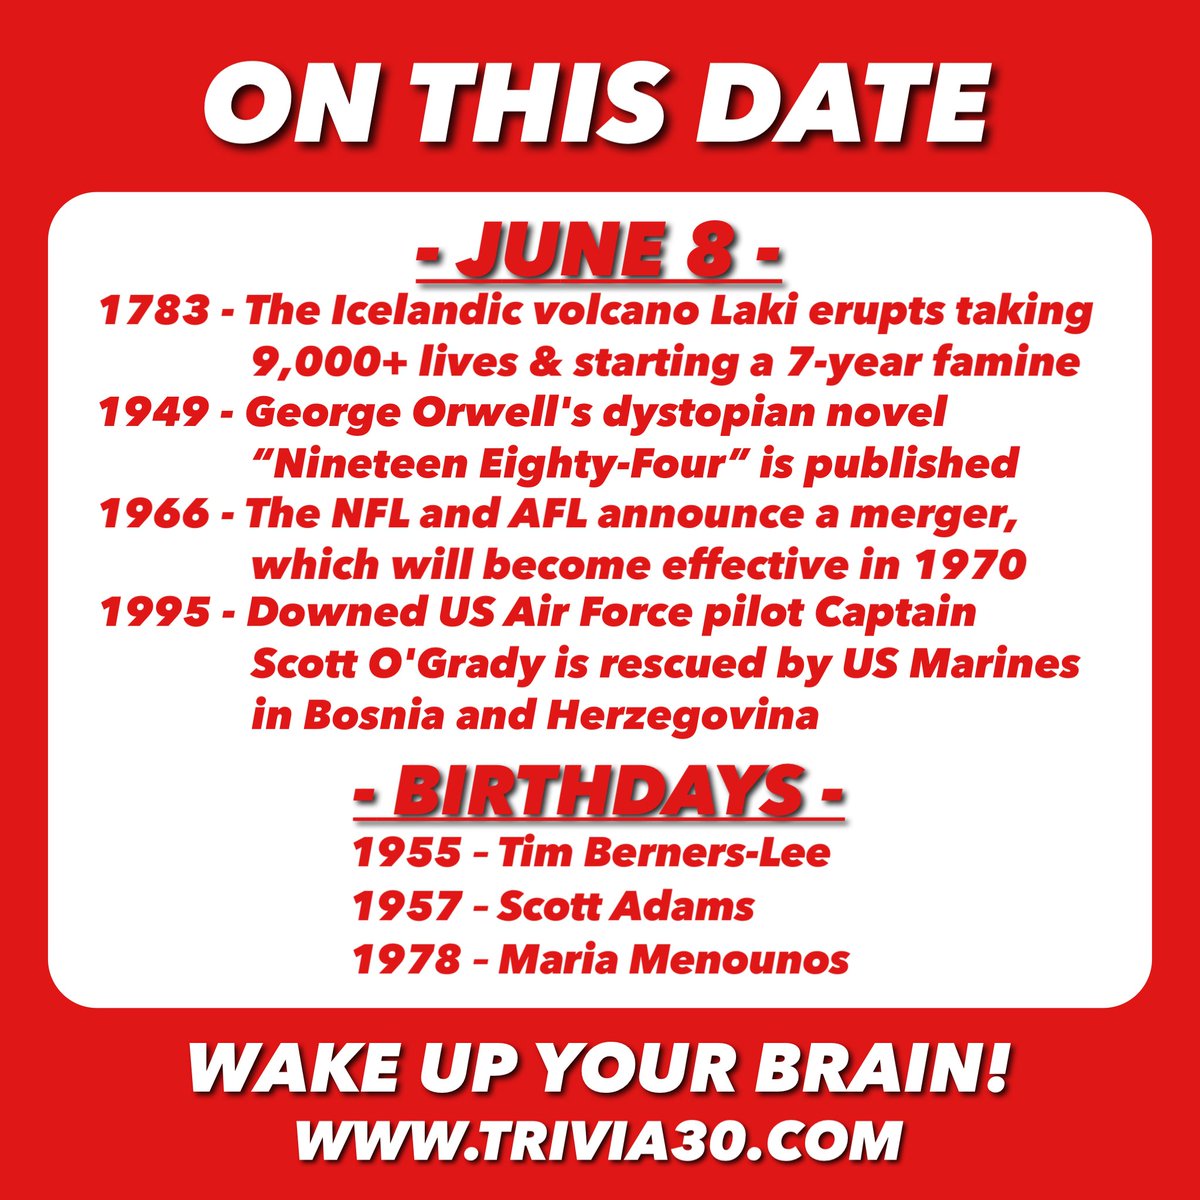 Here's your OTD trivia for 6/8... Join us for trivia tonight at Overtime Bar & Grill, and have a great Thursday! #trivia30 #wakeupyourbrain #Iceland #Laki #georgeOrwell #1984 #NFL #AFL #USAF #USMC #Bosnia #TimBernersLee #worldwideweb #www #ScottAdams #Dilbert #MariaMenounos